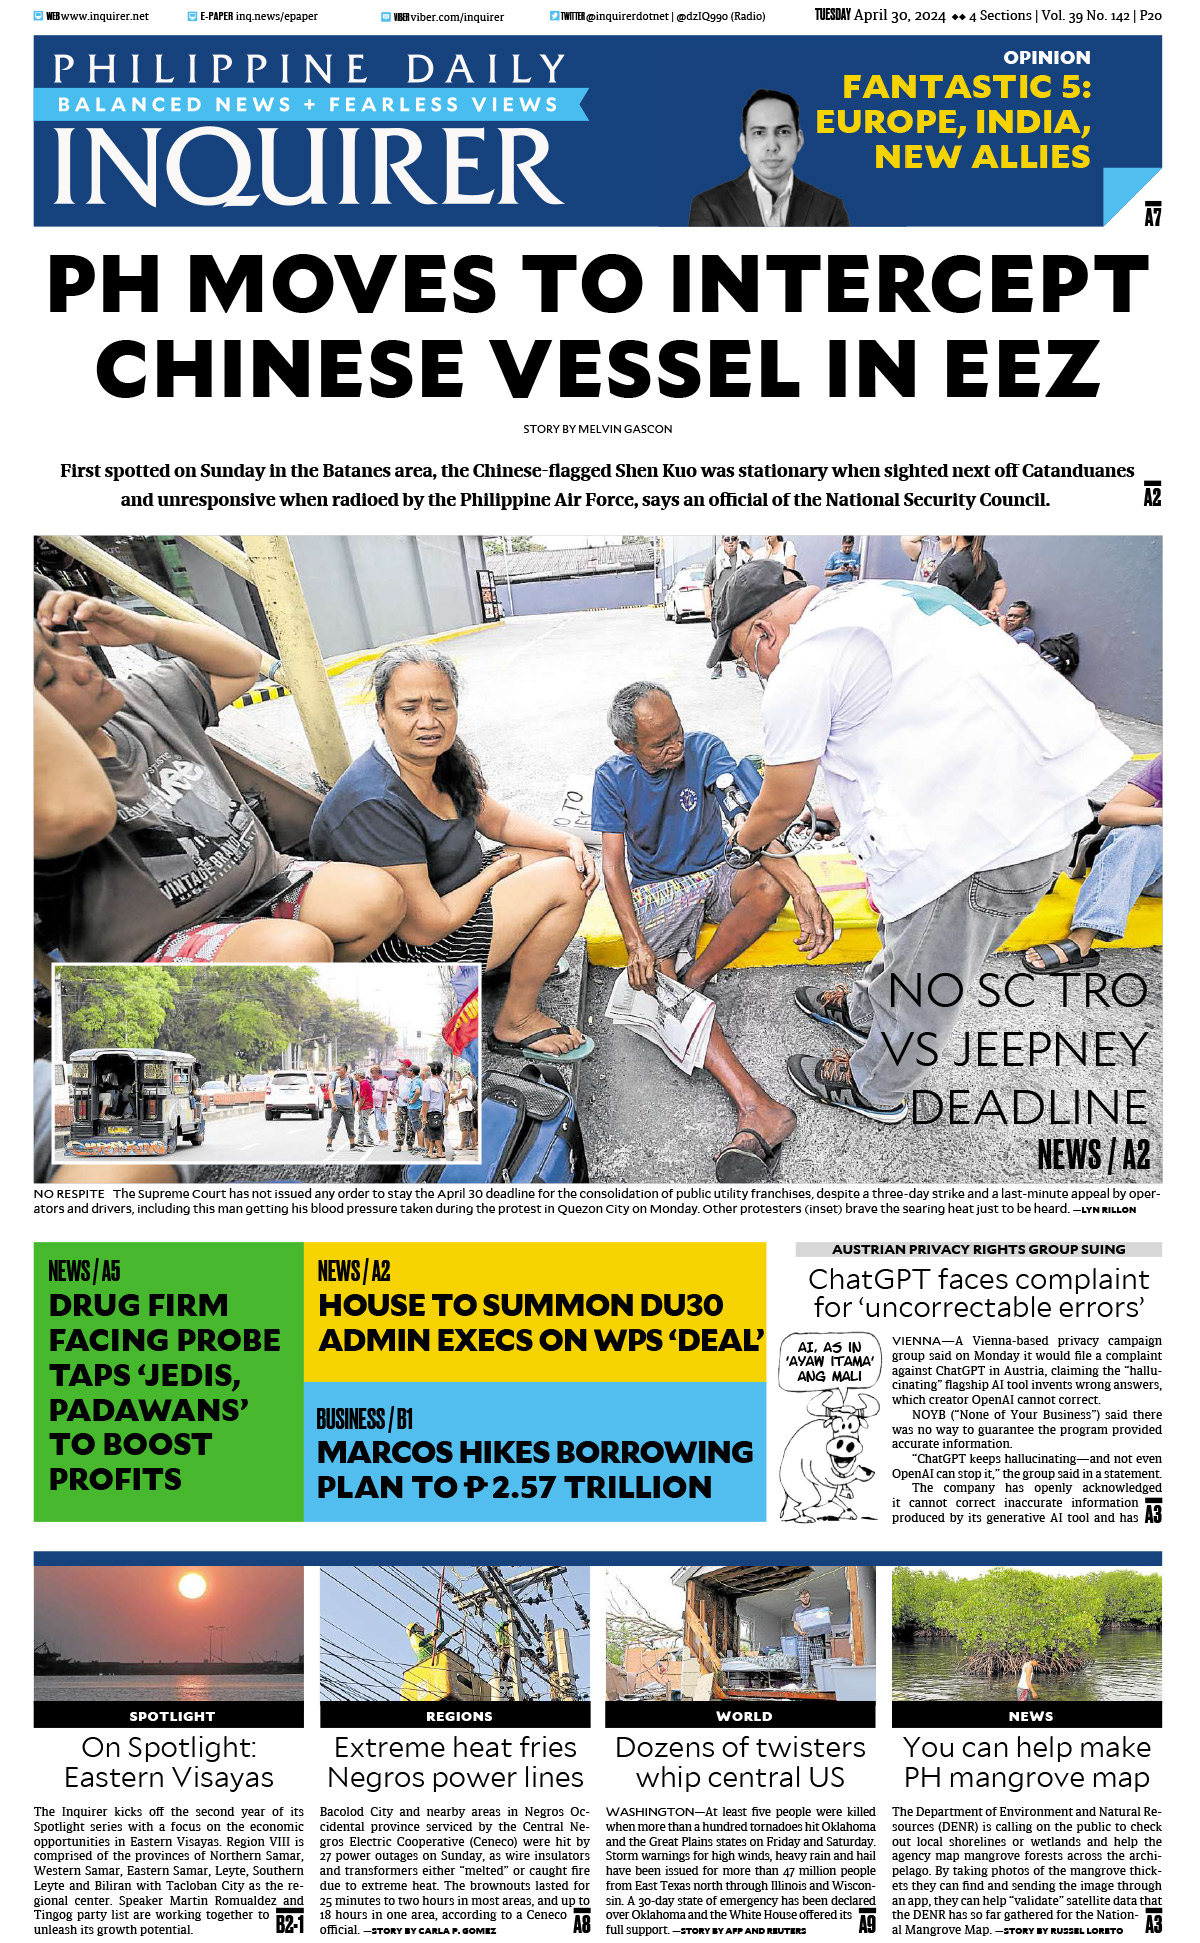 Today’s Paper: April 30, 2024